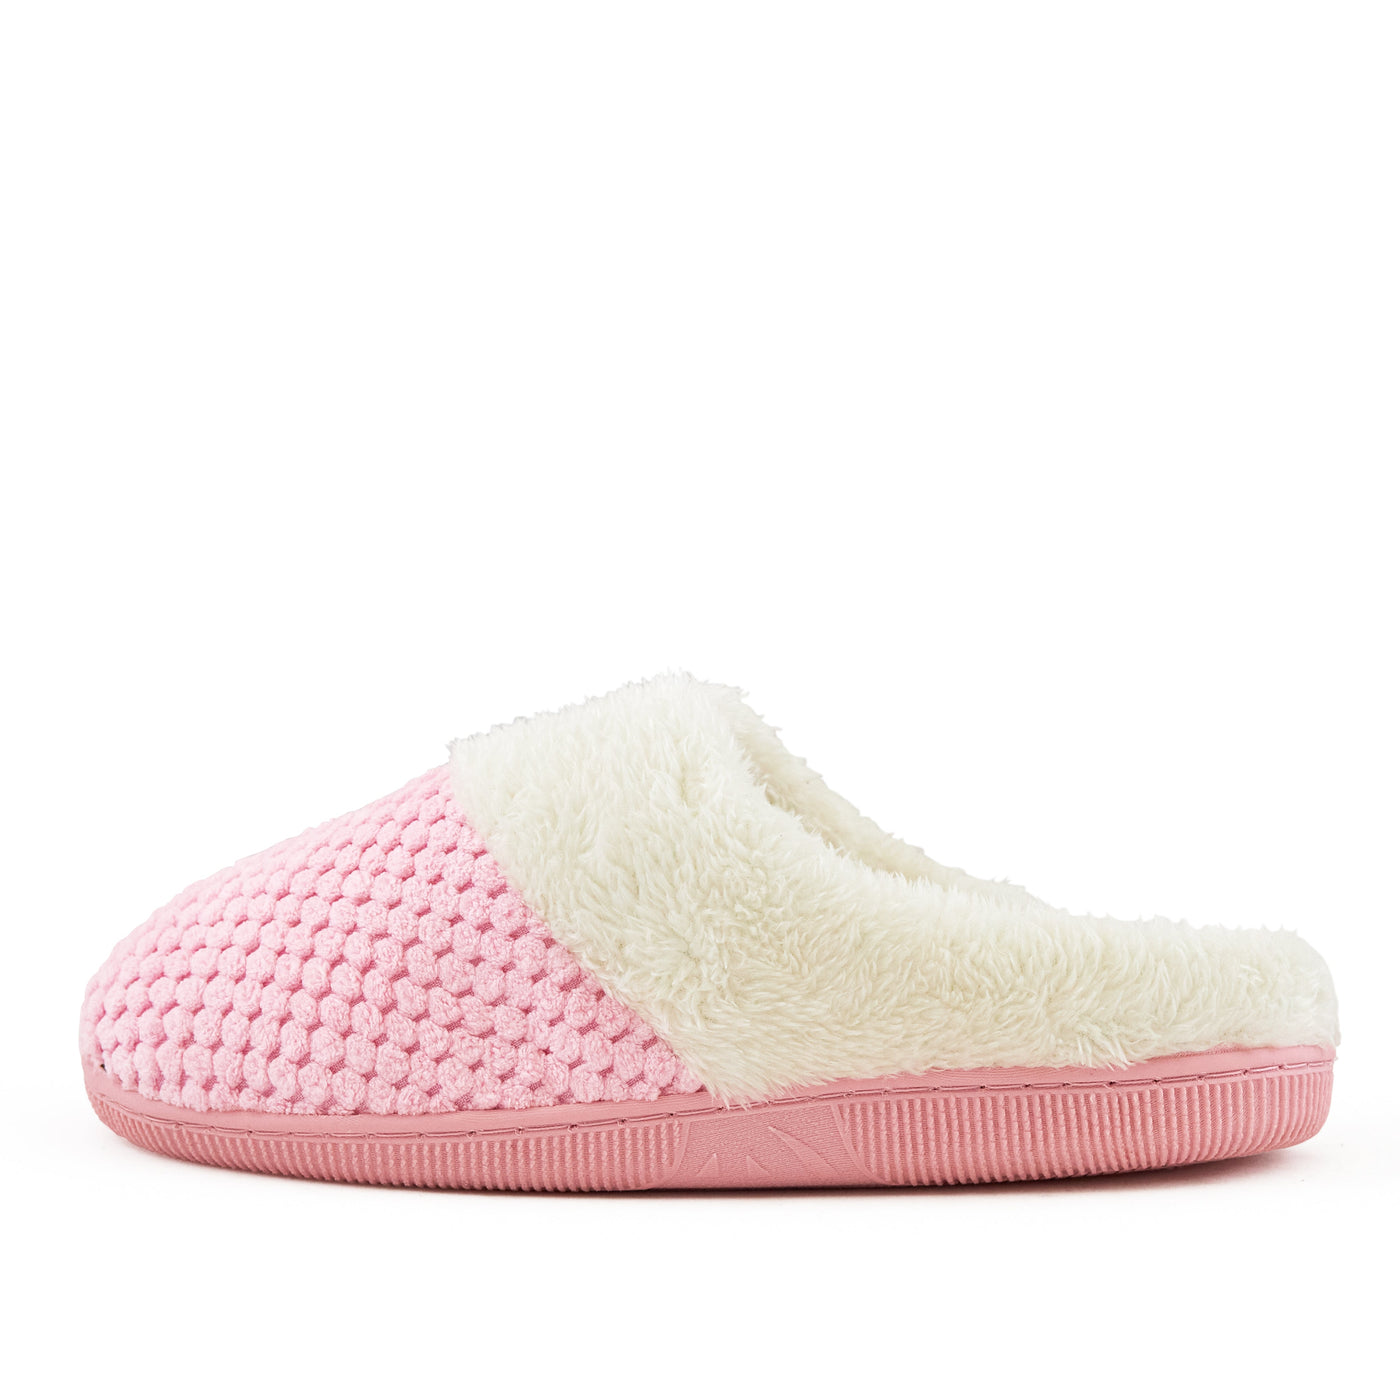 Women's Slippers Cozy Pink by Nest Shoes